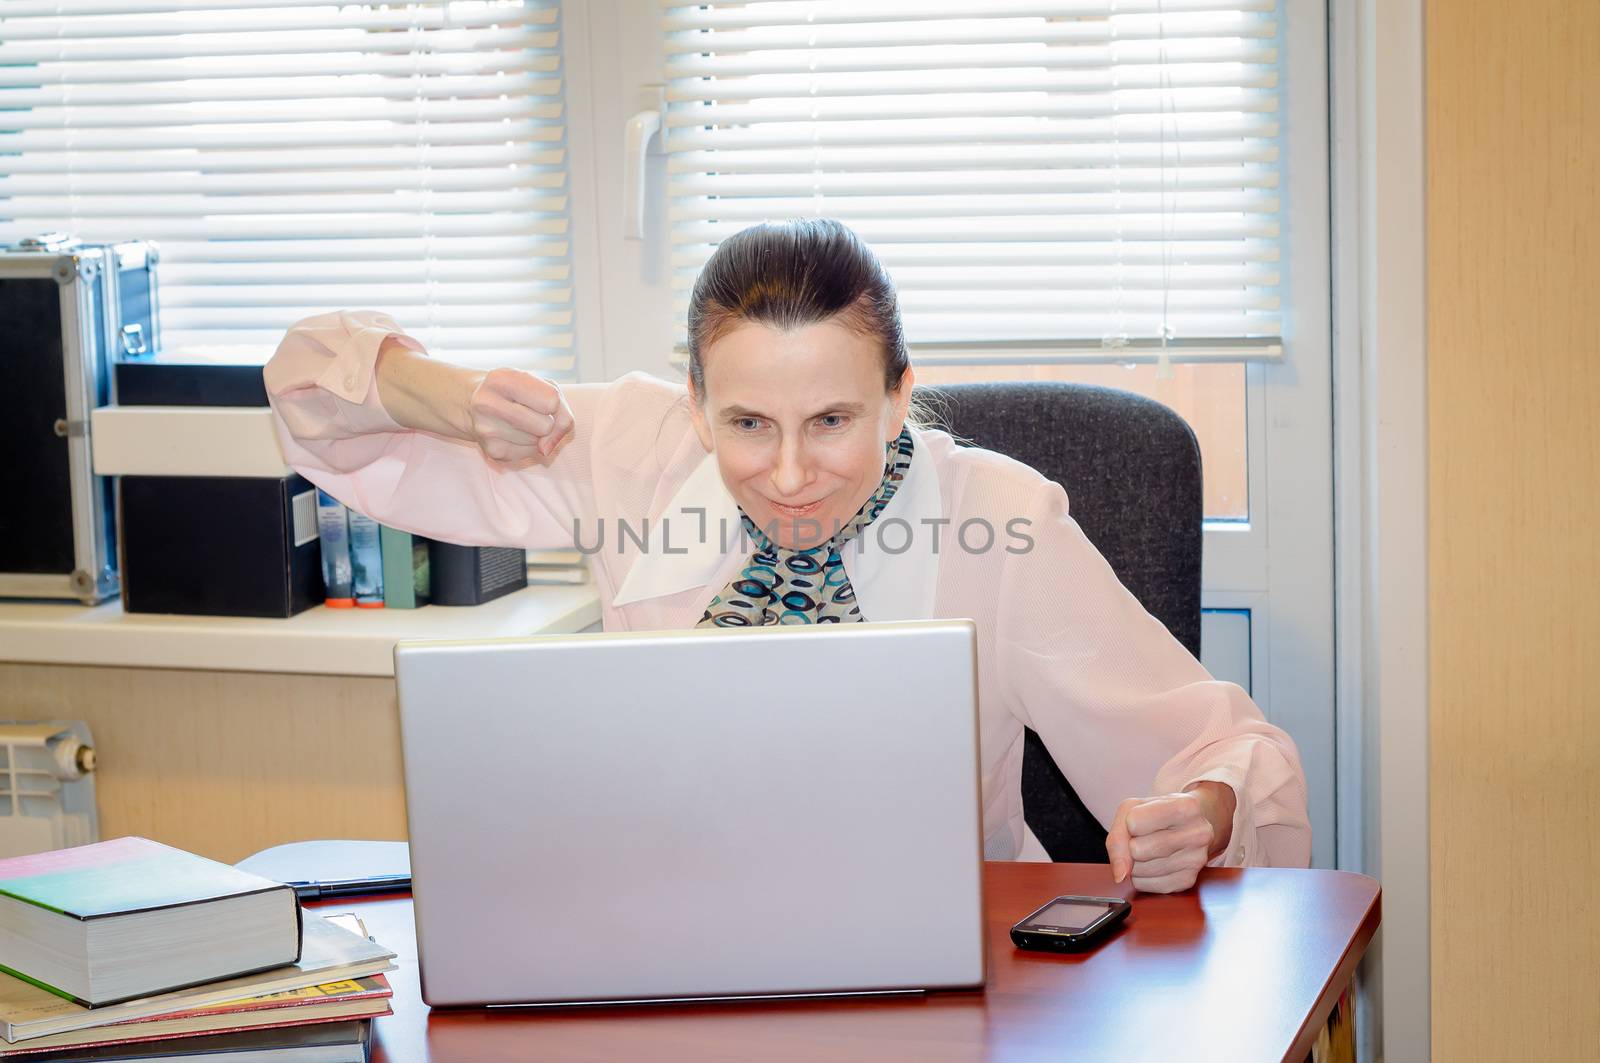 A fifty years old woman very angry with the modern technology